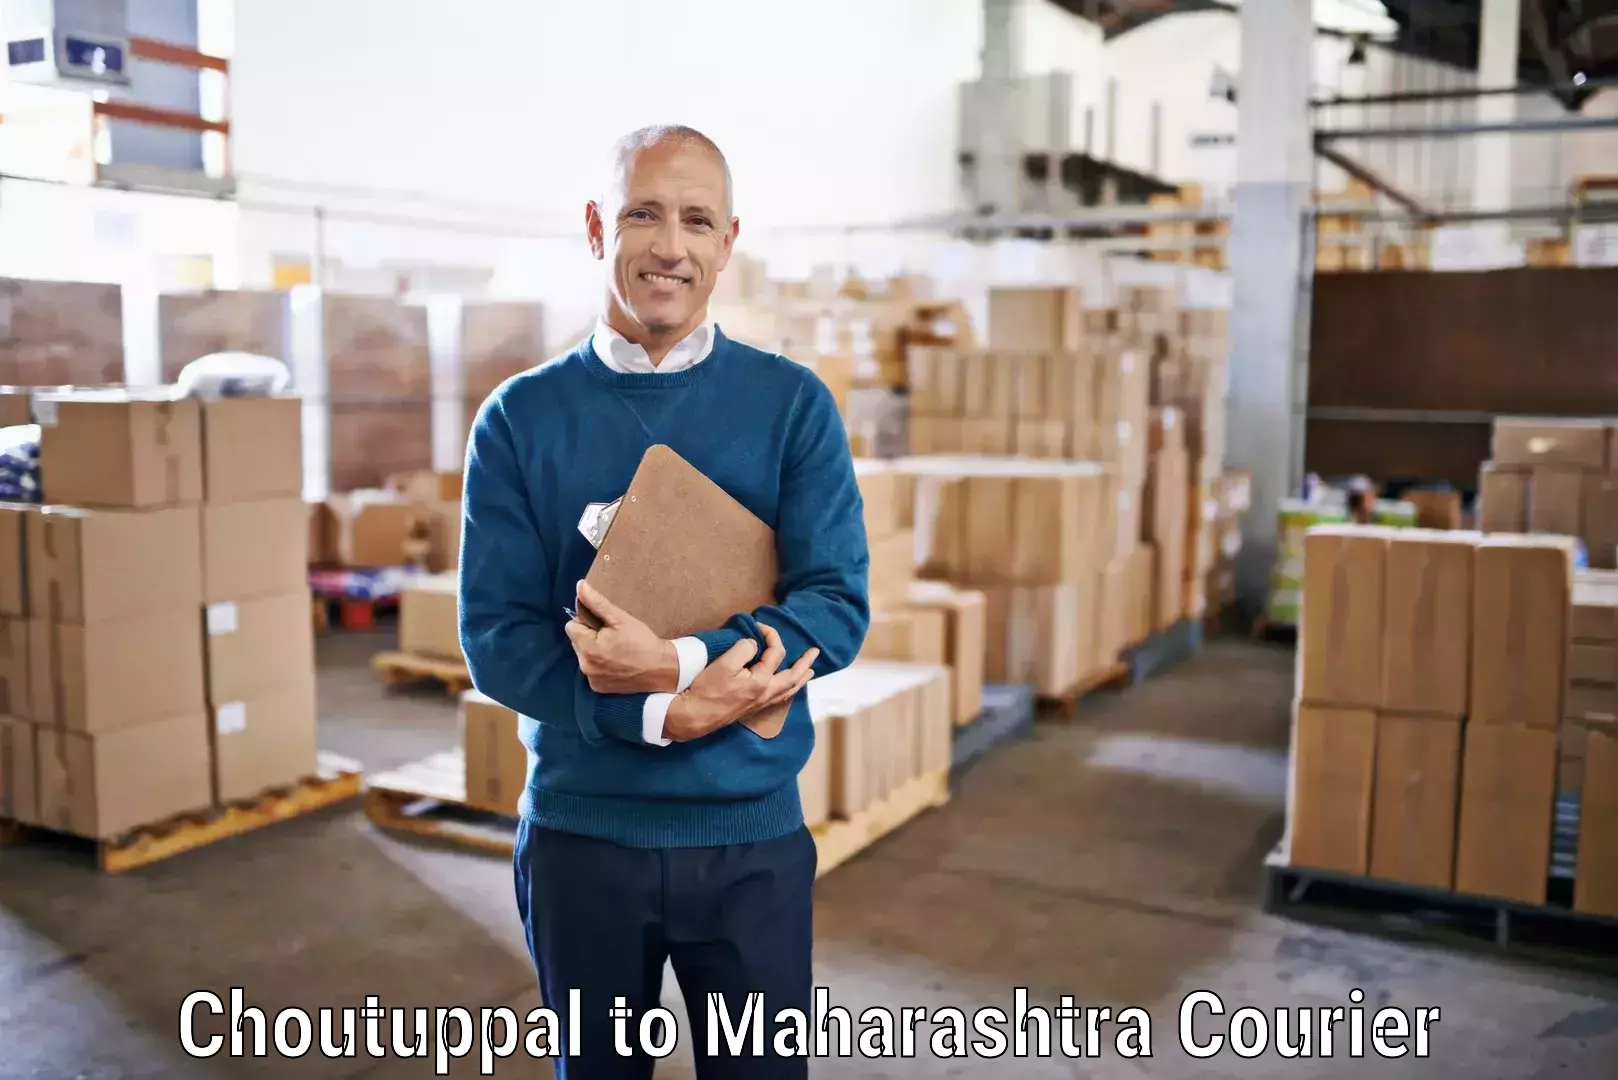 Customer-centric shipping in Choutuppal to Greater Thane